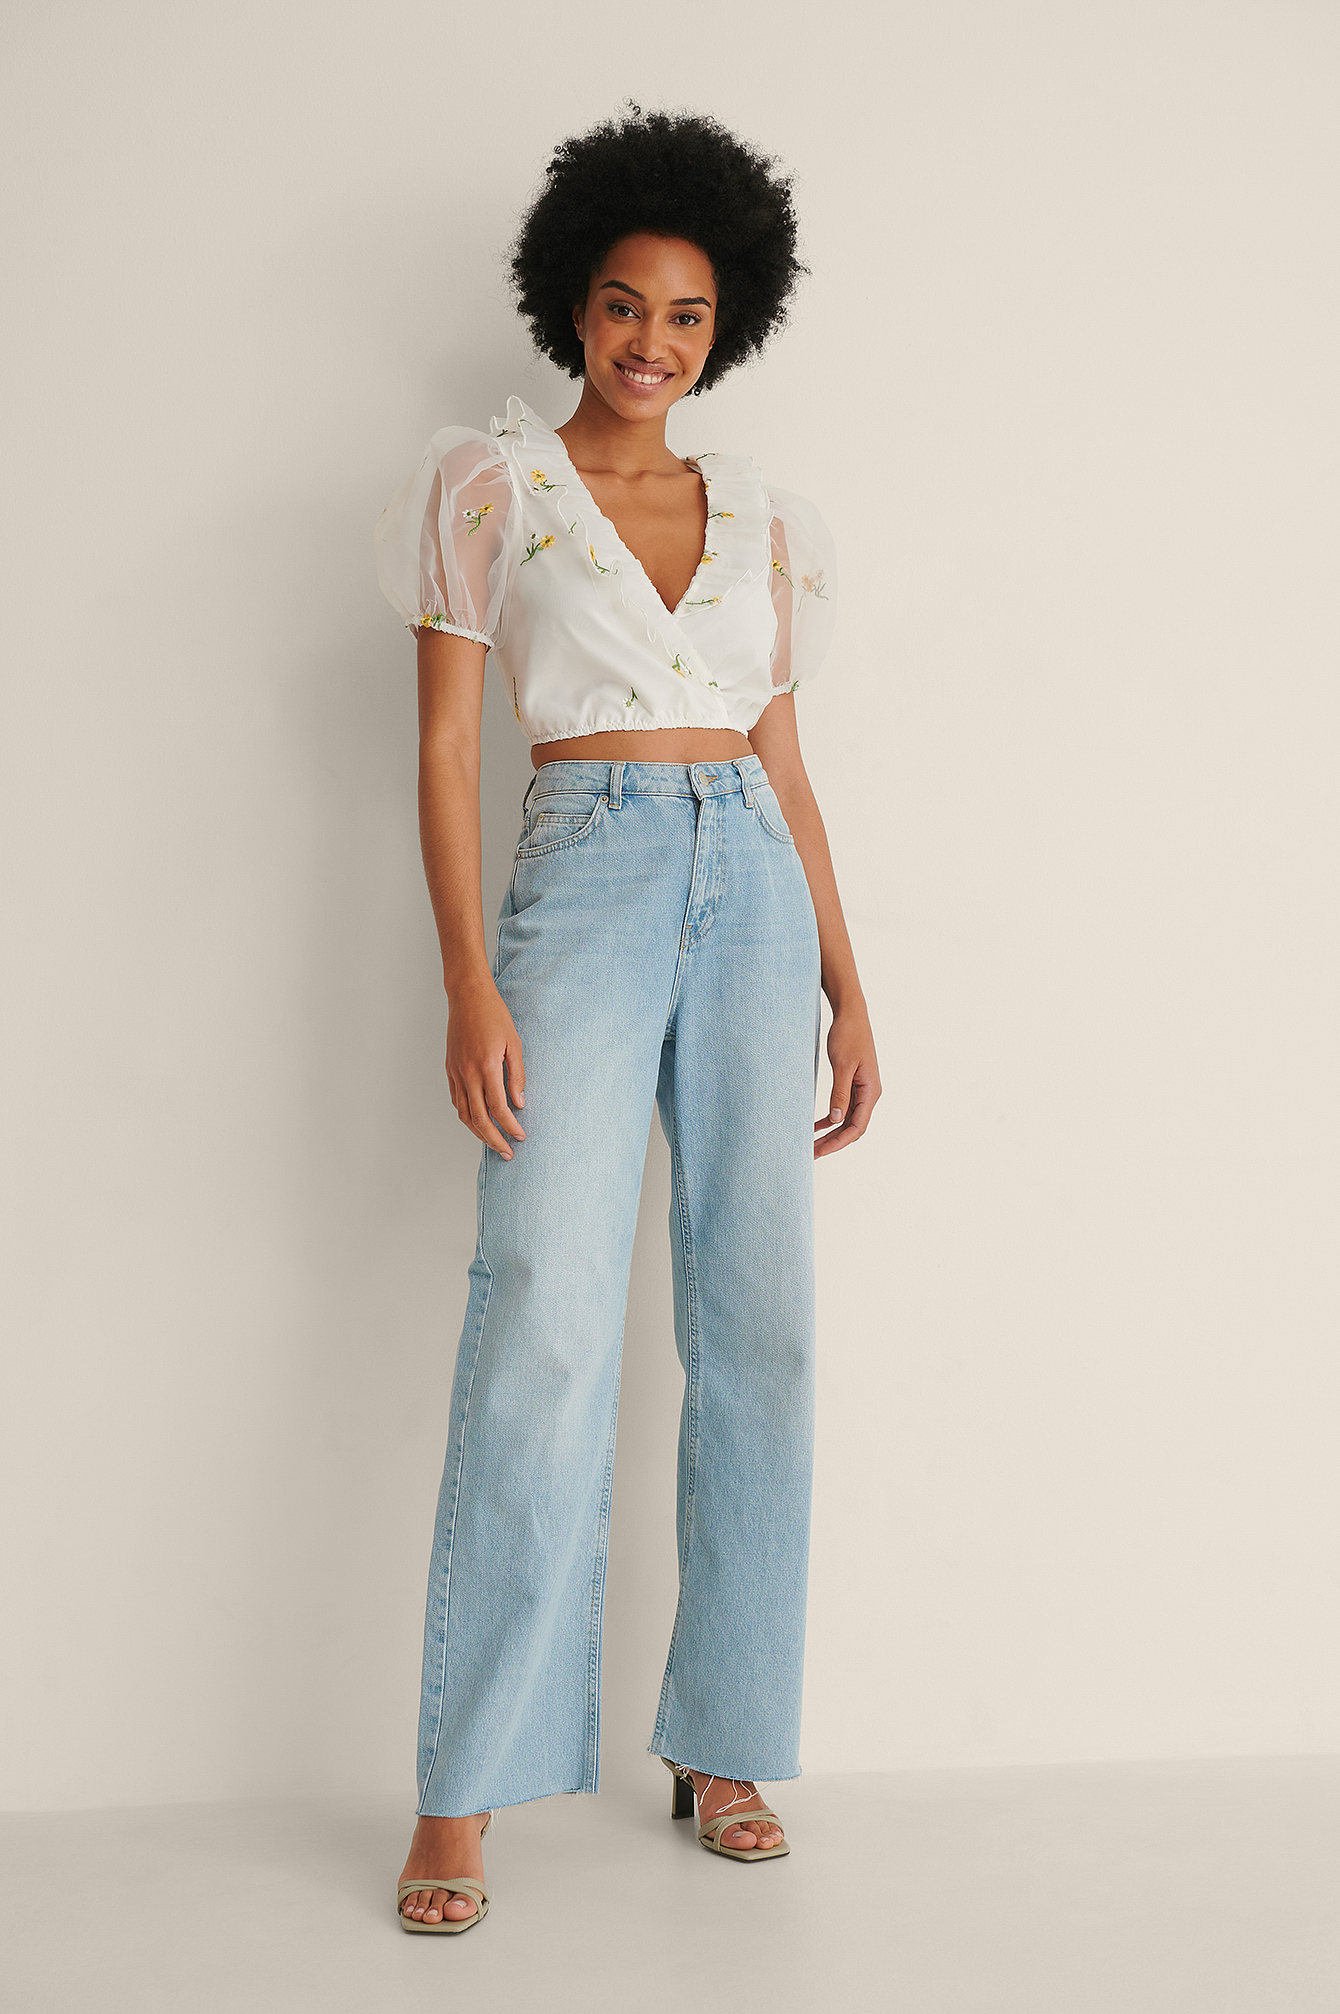 Cropped Organza Top Outfit